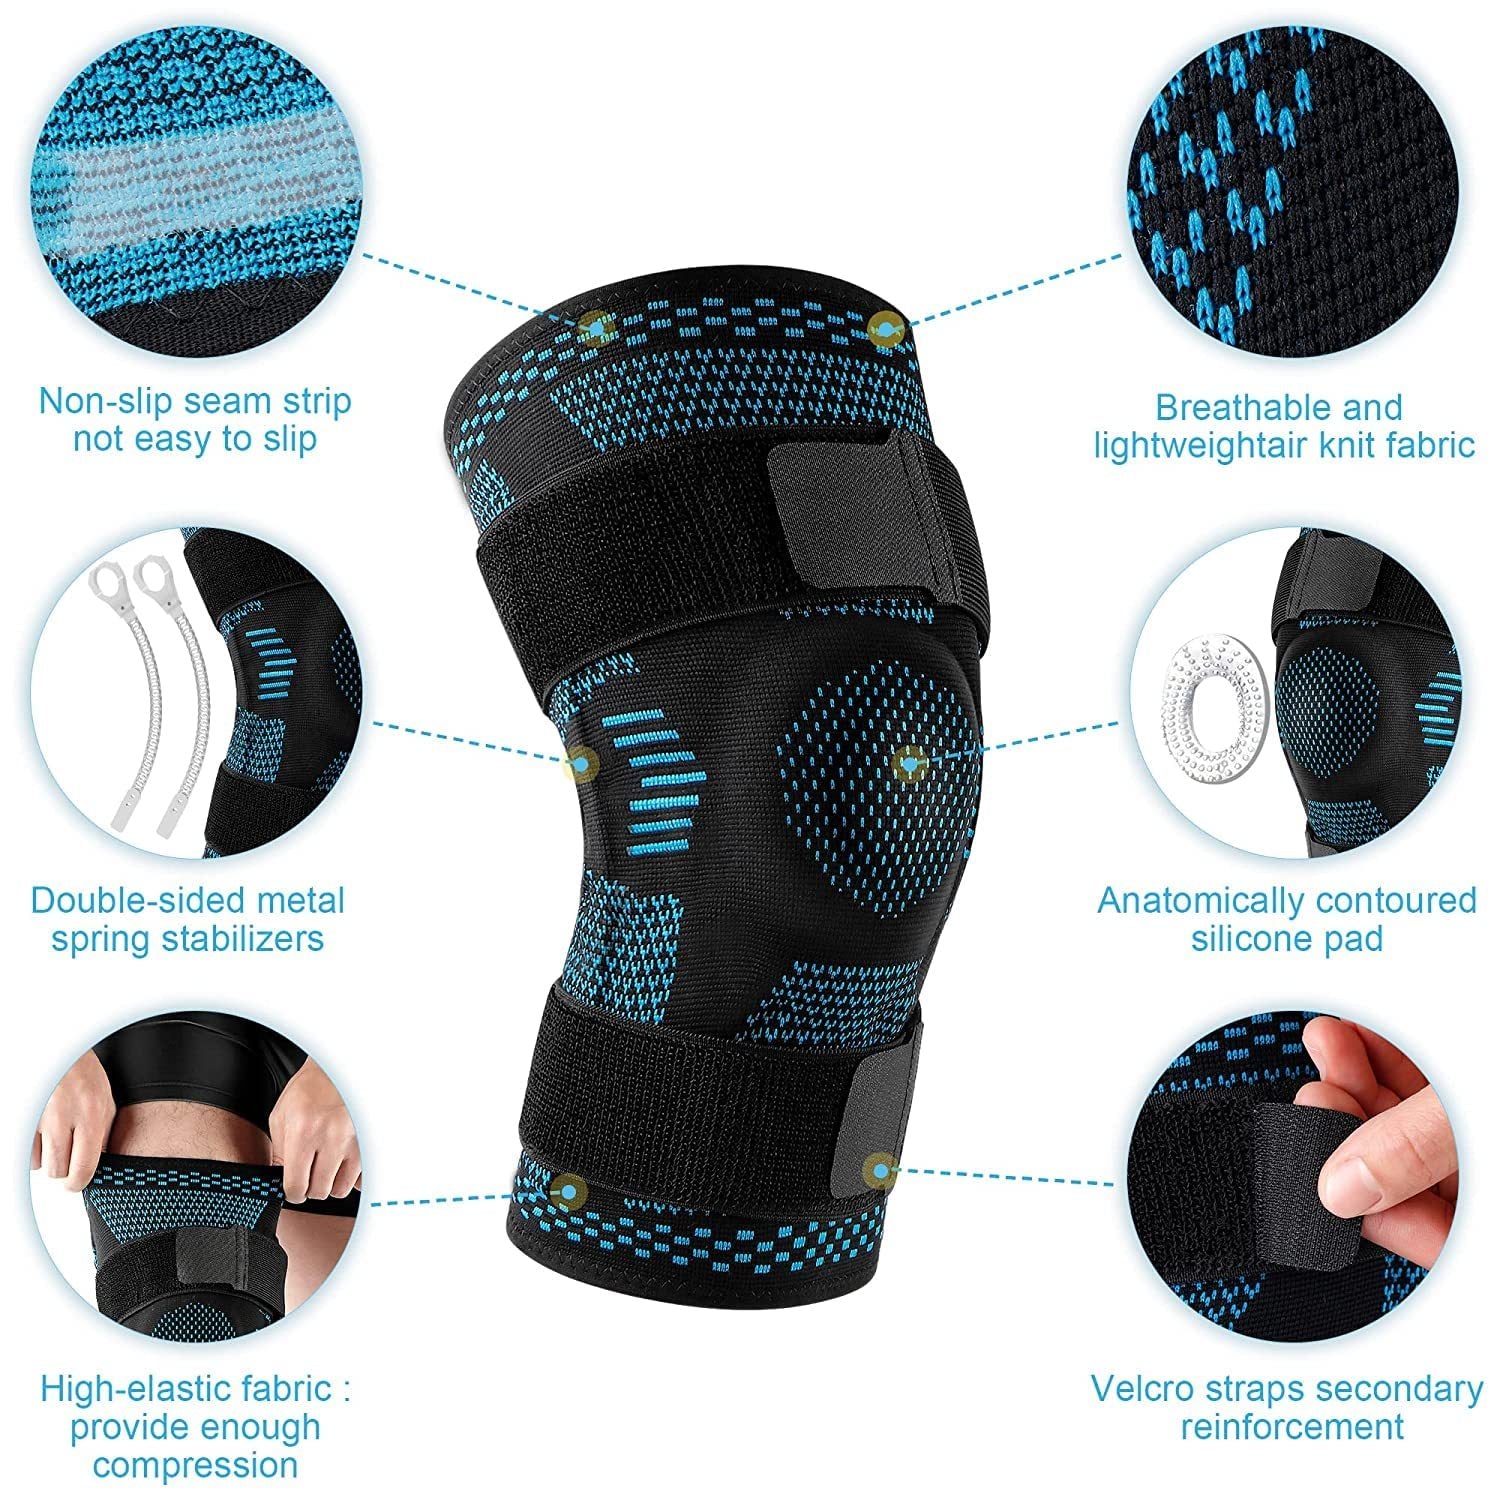 Plus Sleeve with 6 advanced features